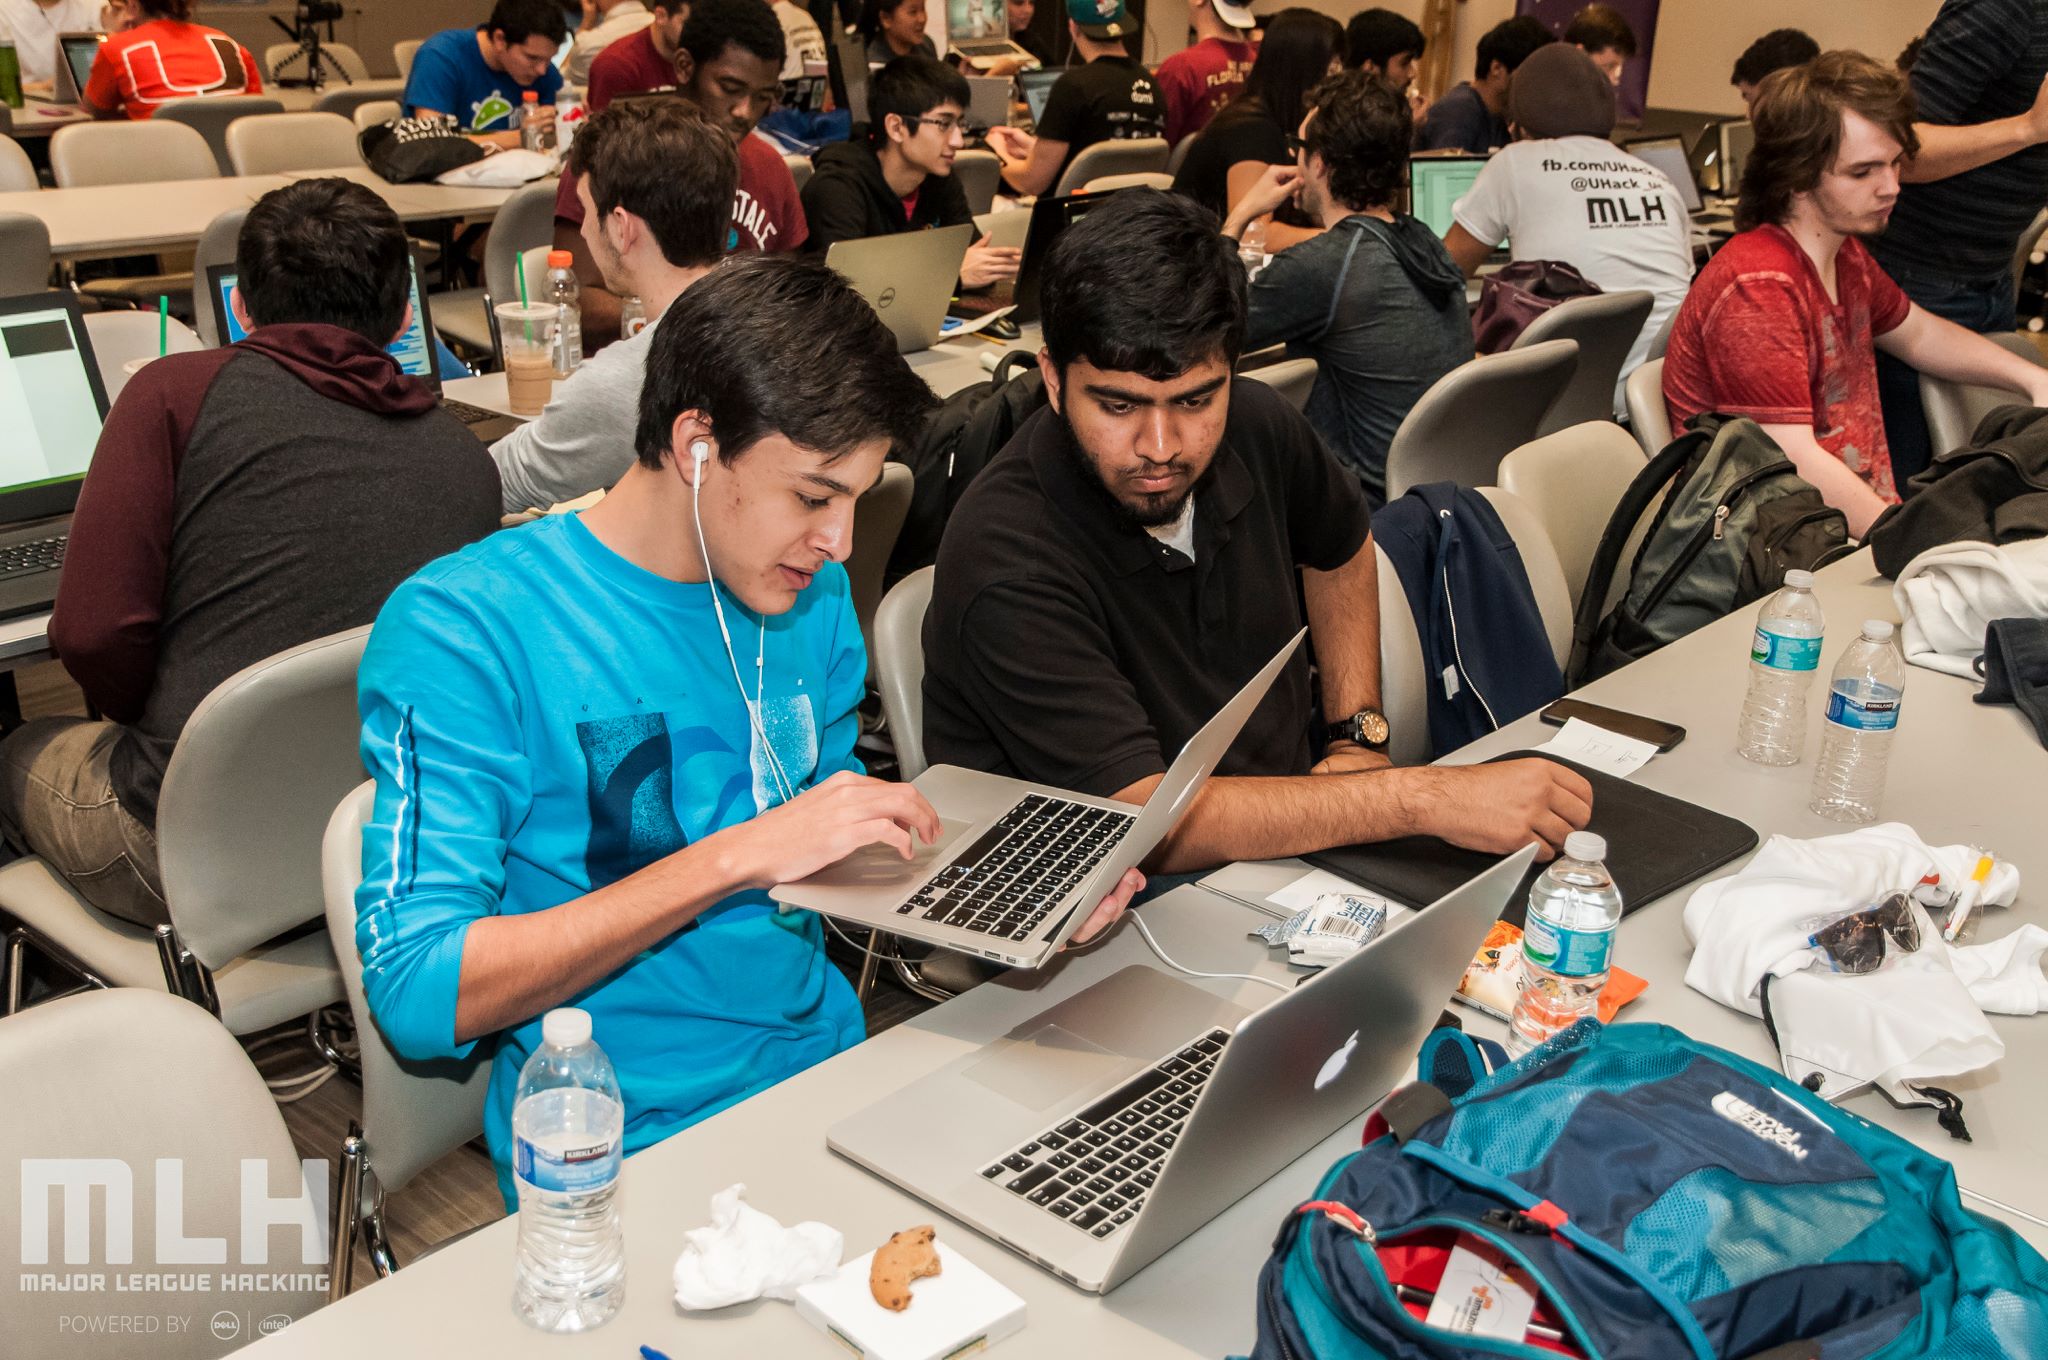 Two male students working at a hackathon